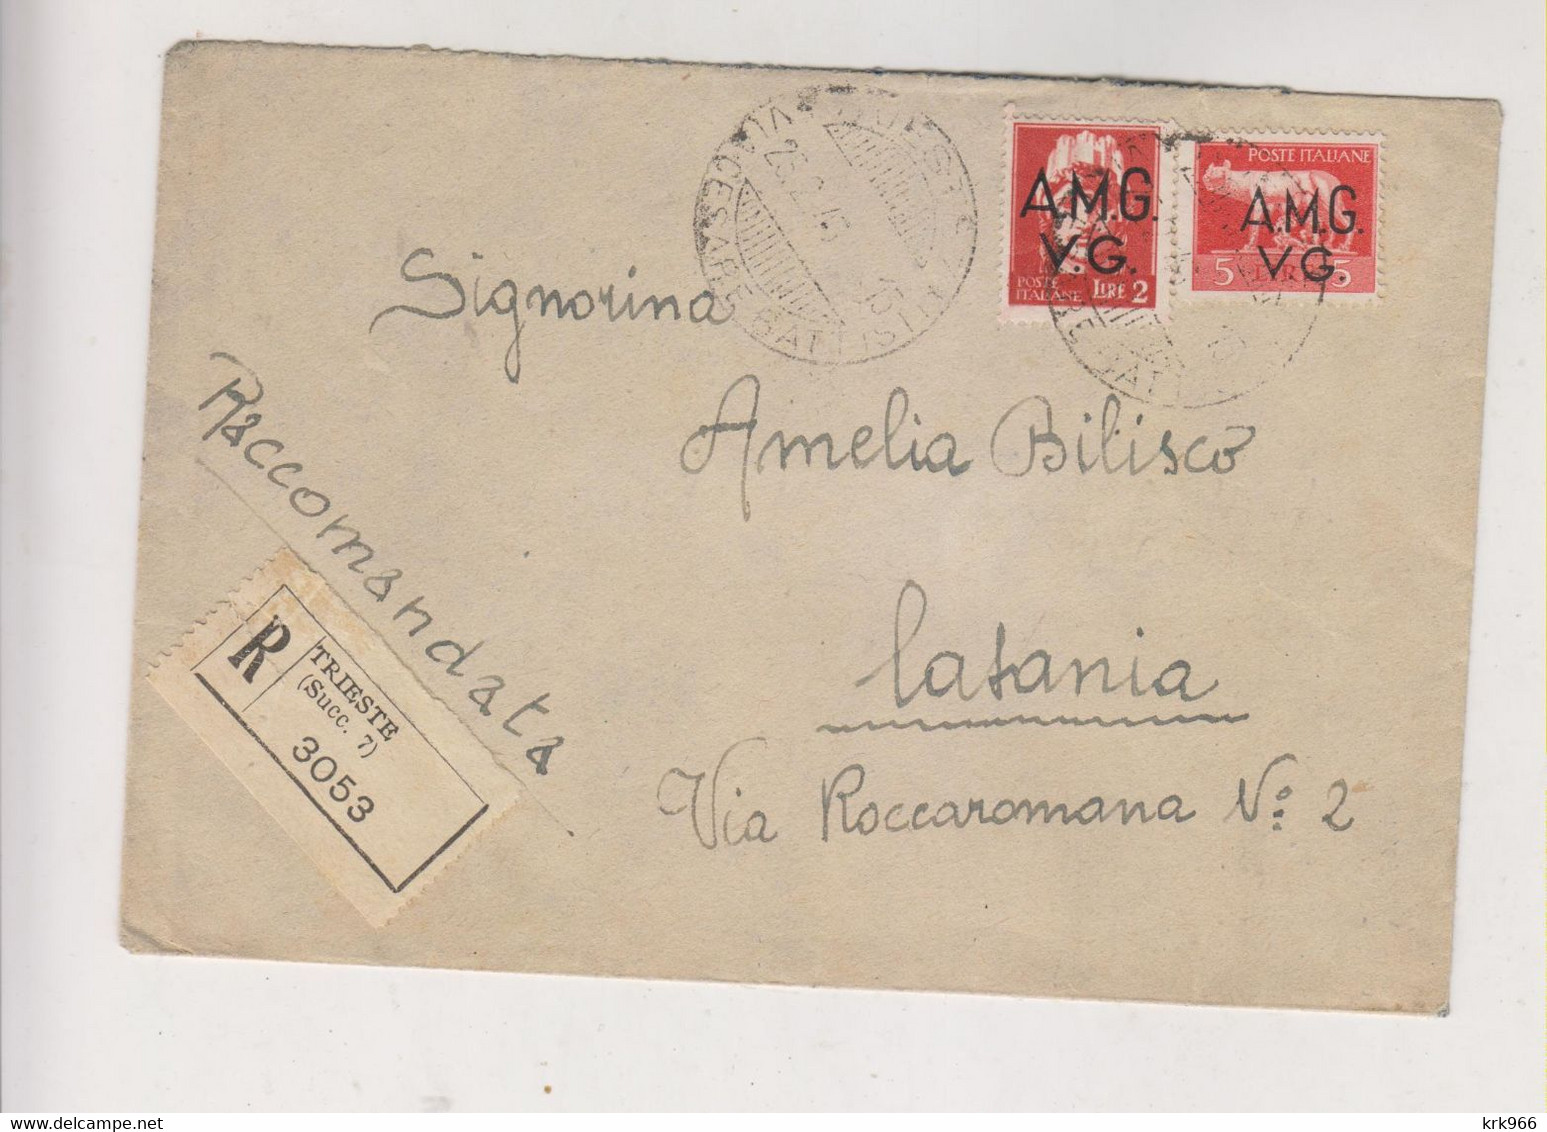 ITALY TRIESTE A 1946  AMG-VG   Nice  Registered Cover - Marcophilia